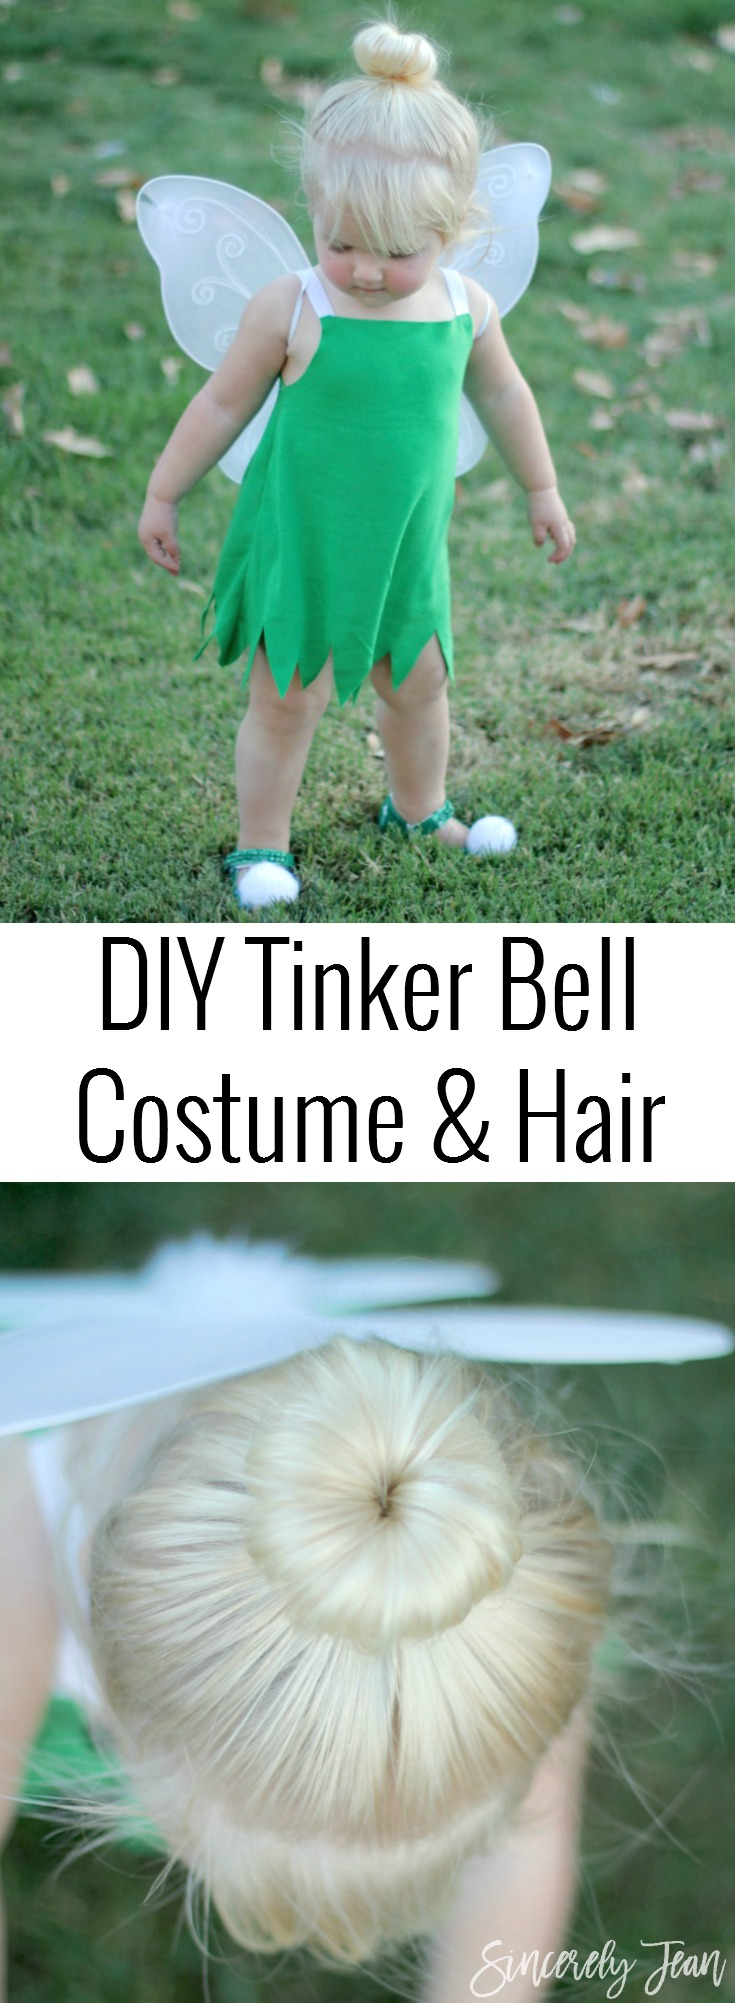 Toddler Halloween Costume - DIY Toddler Tinker Bell Costume and Hair - Simple and cute tutorial on how to make a toddler Tinker Bell costume and tips for doing the hair! | www.sincerelyjean.com